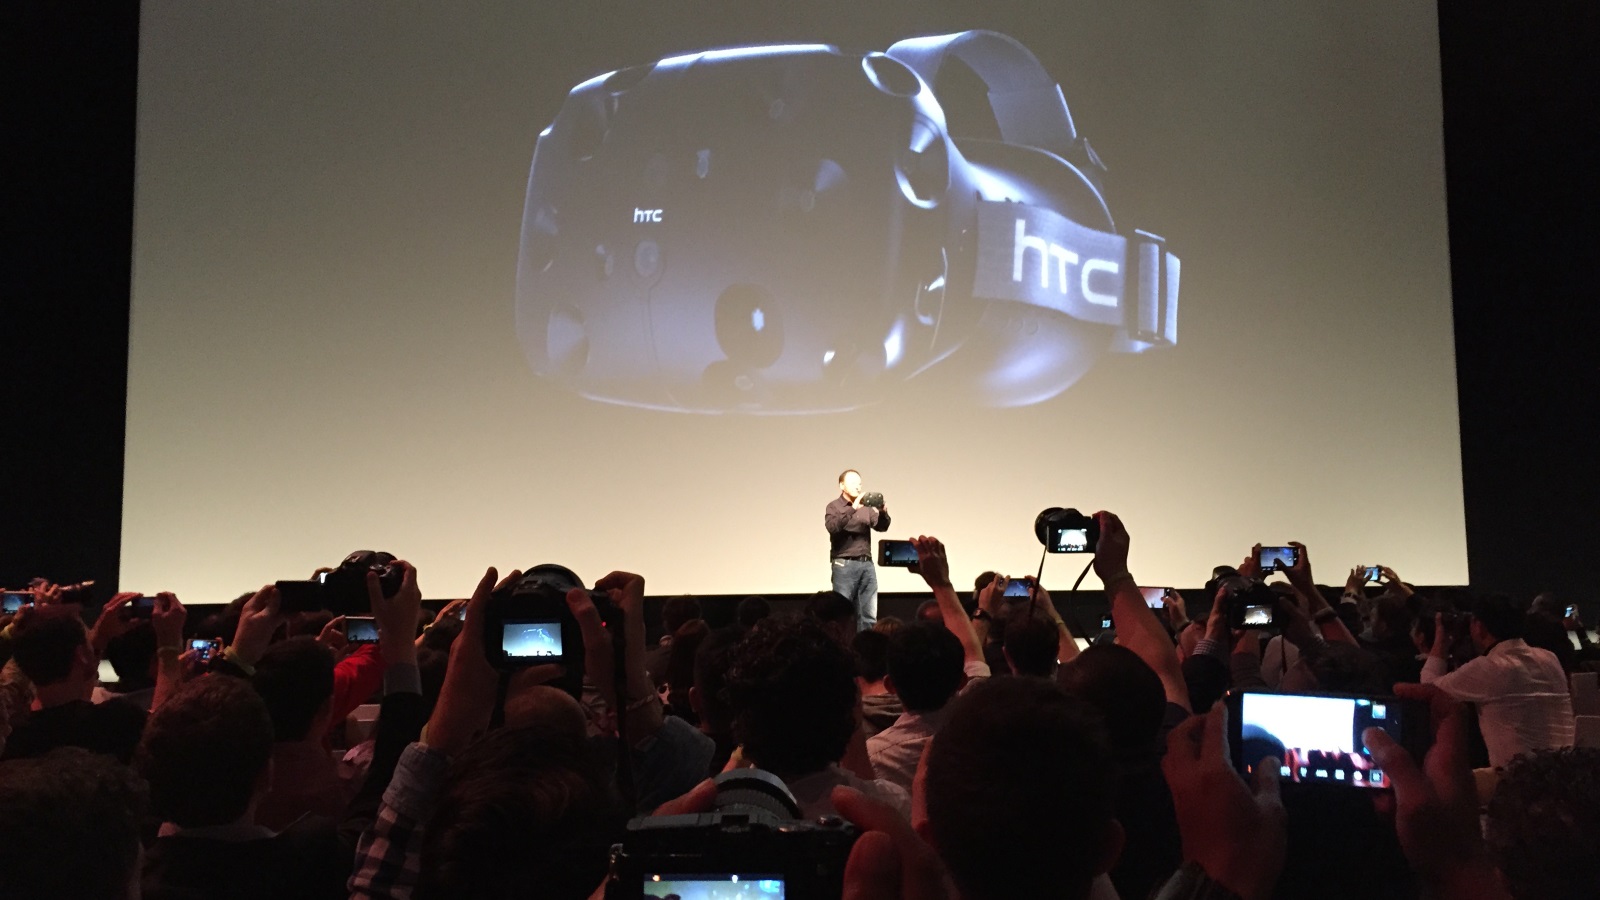 HTC CEO Peter Chou Introducing the HTC Vive